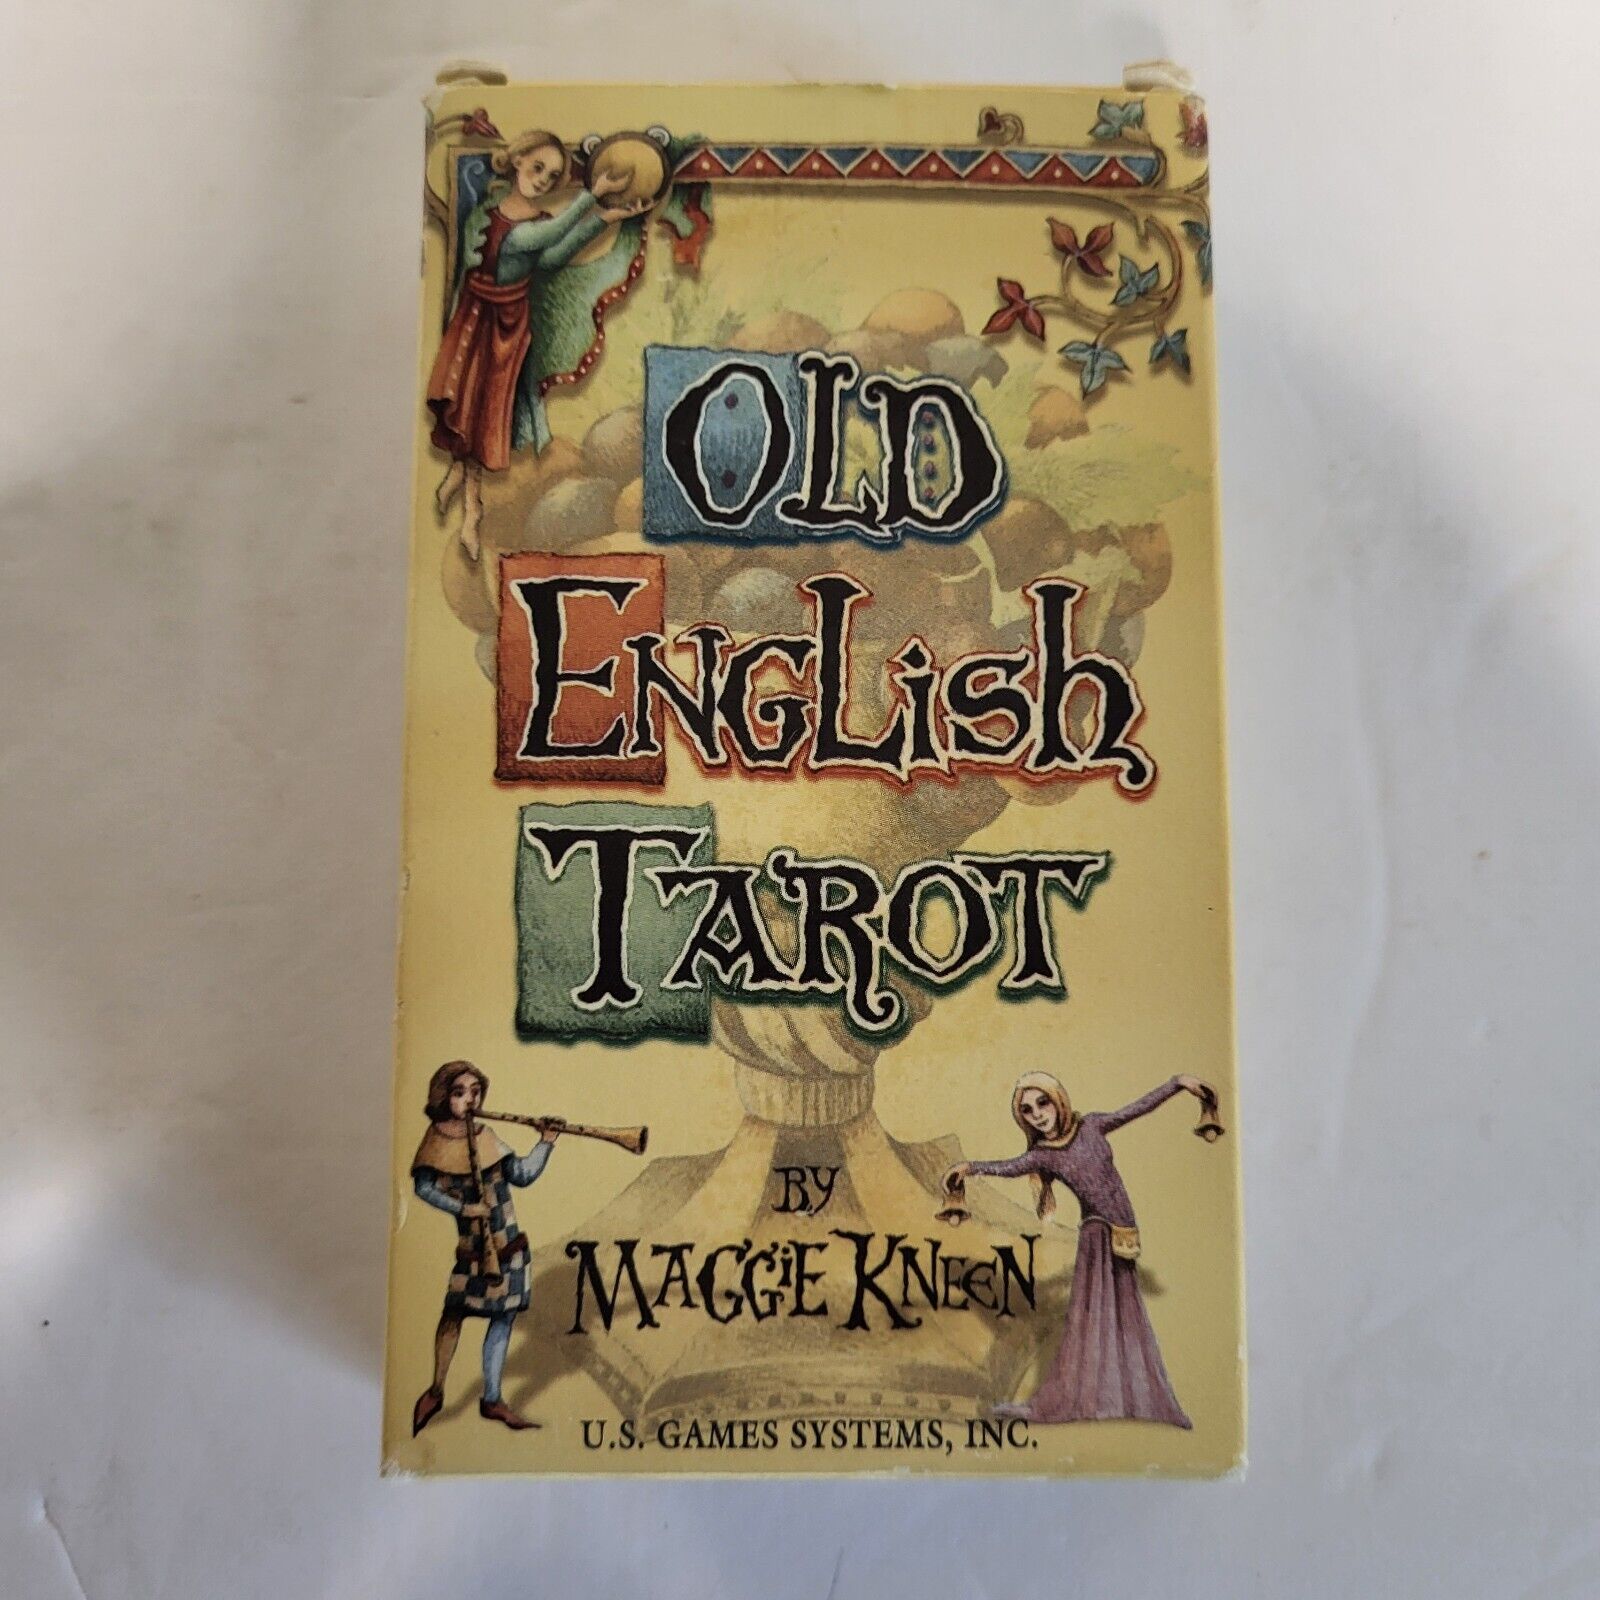 Vintage Old English Tarot Card Set / Instructions By Maggie Kneen 